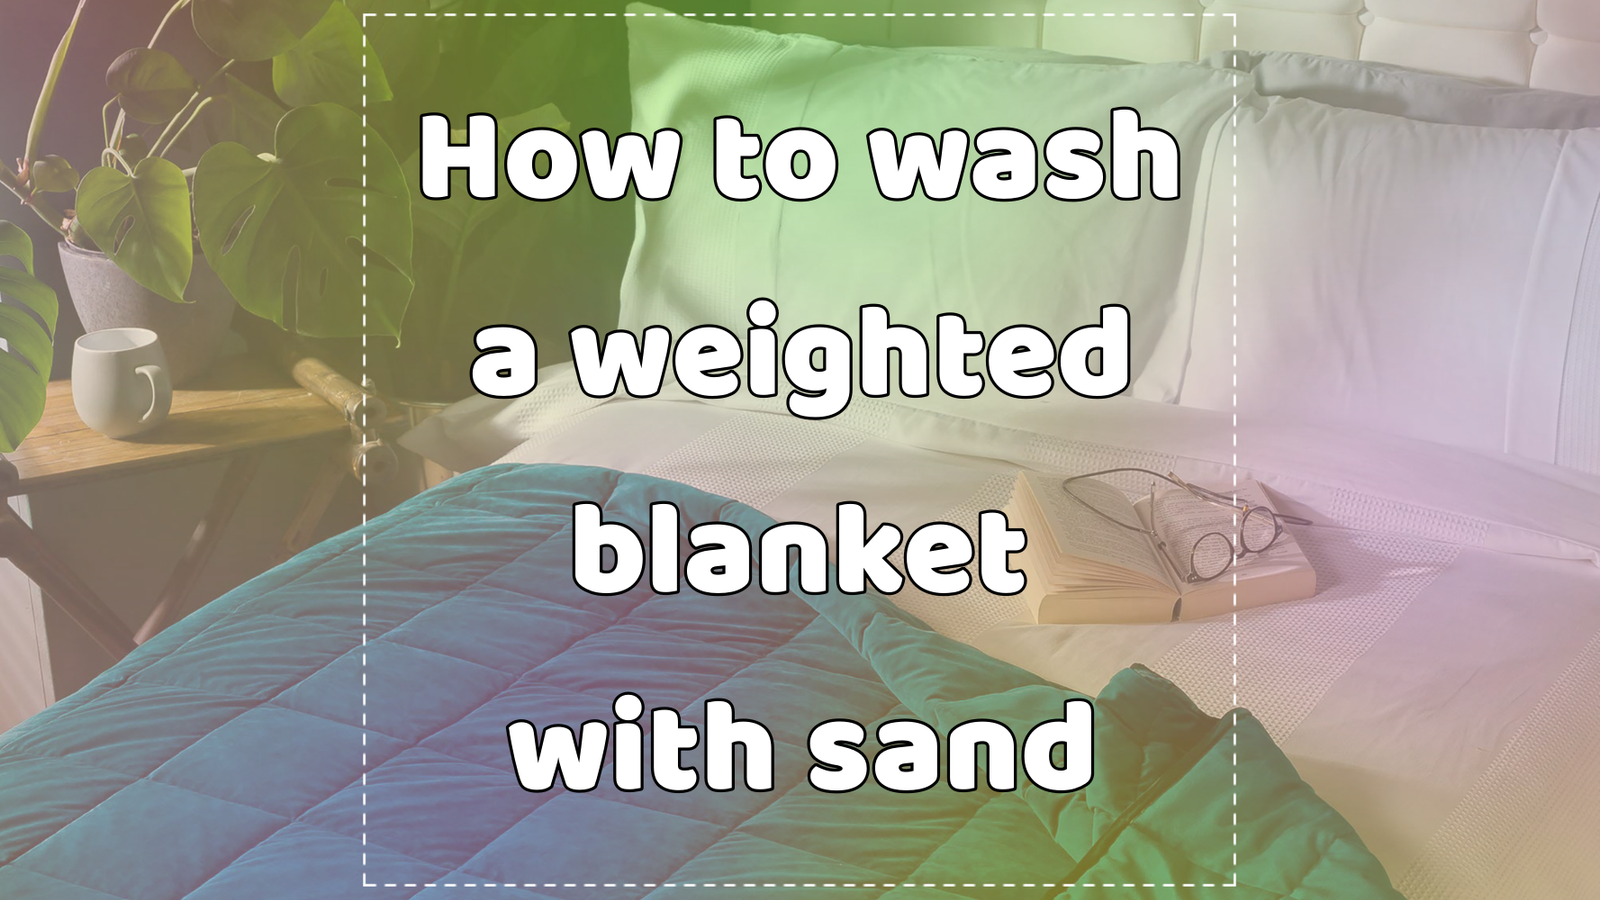 How to wash a weighted blanket with sand